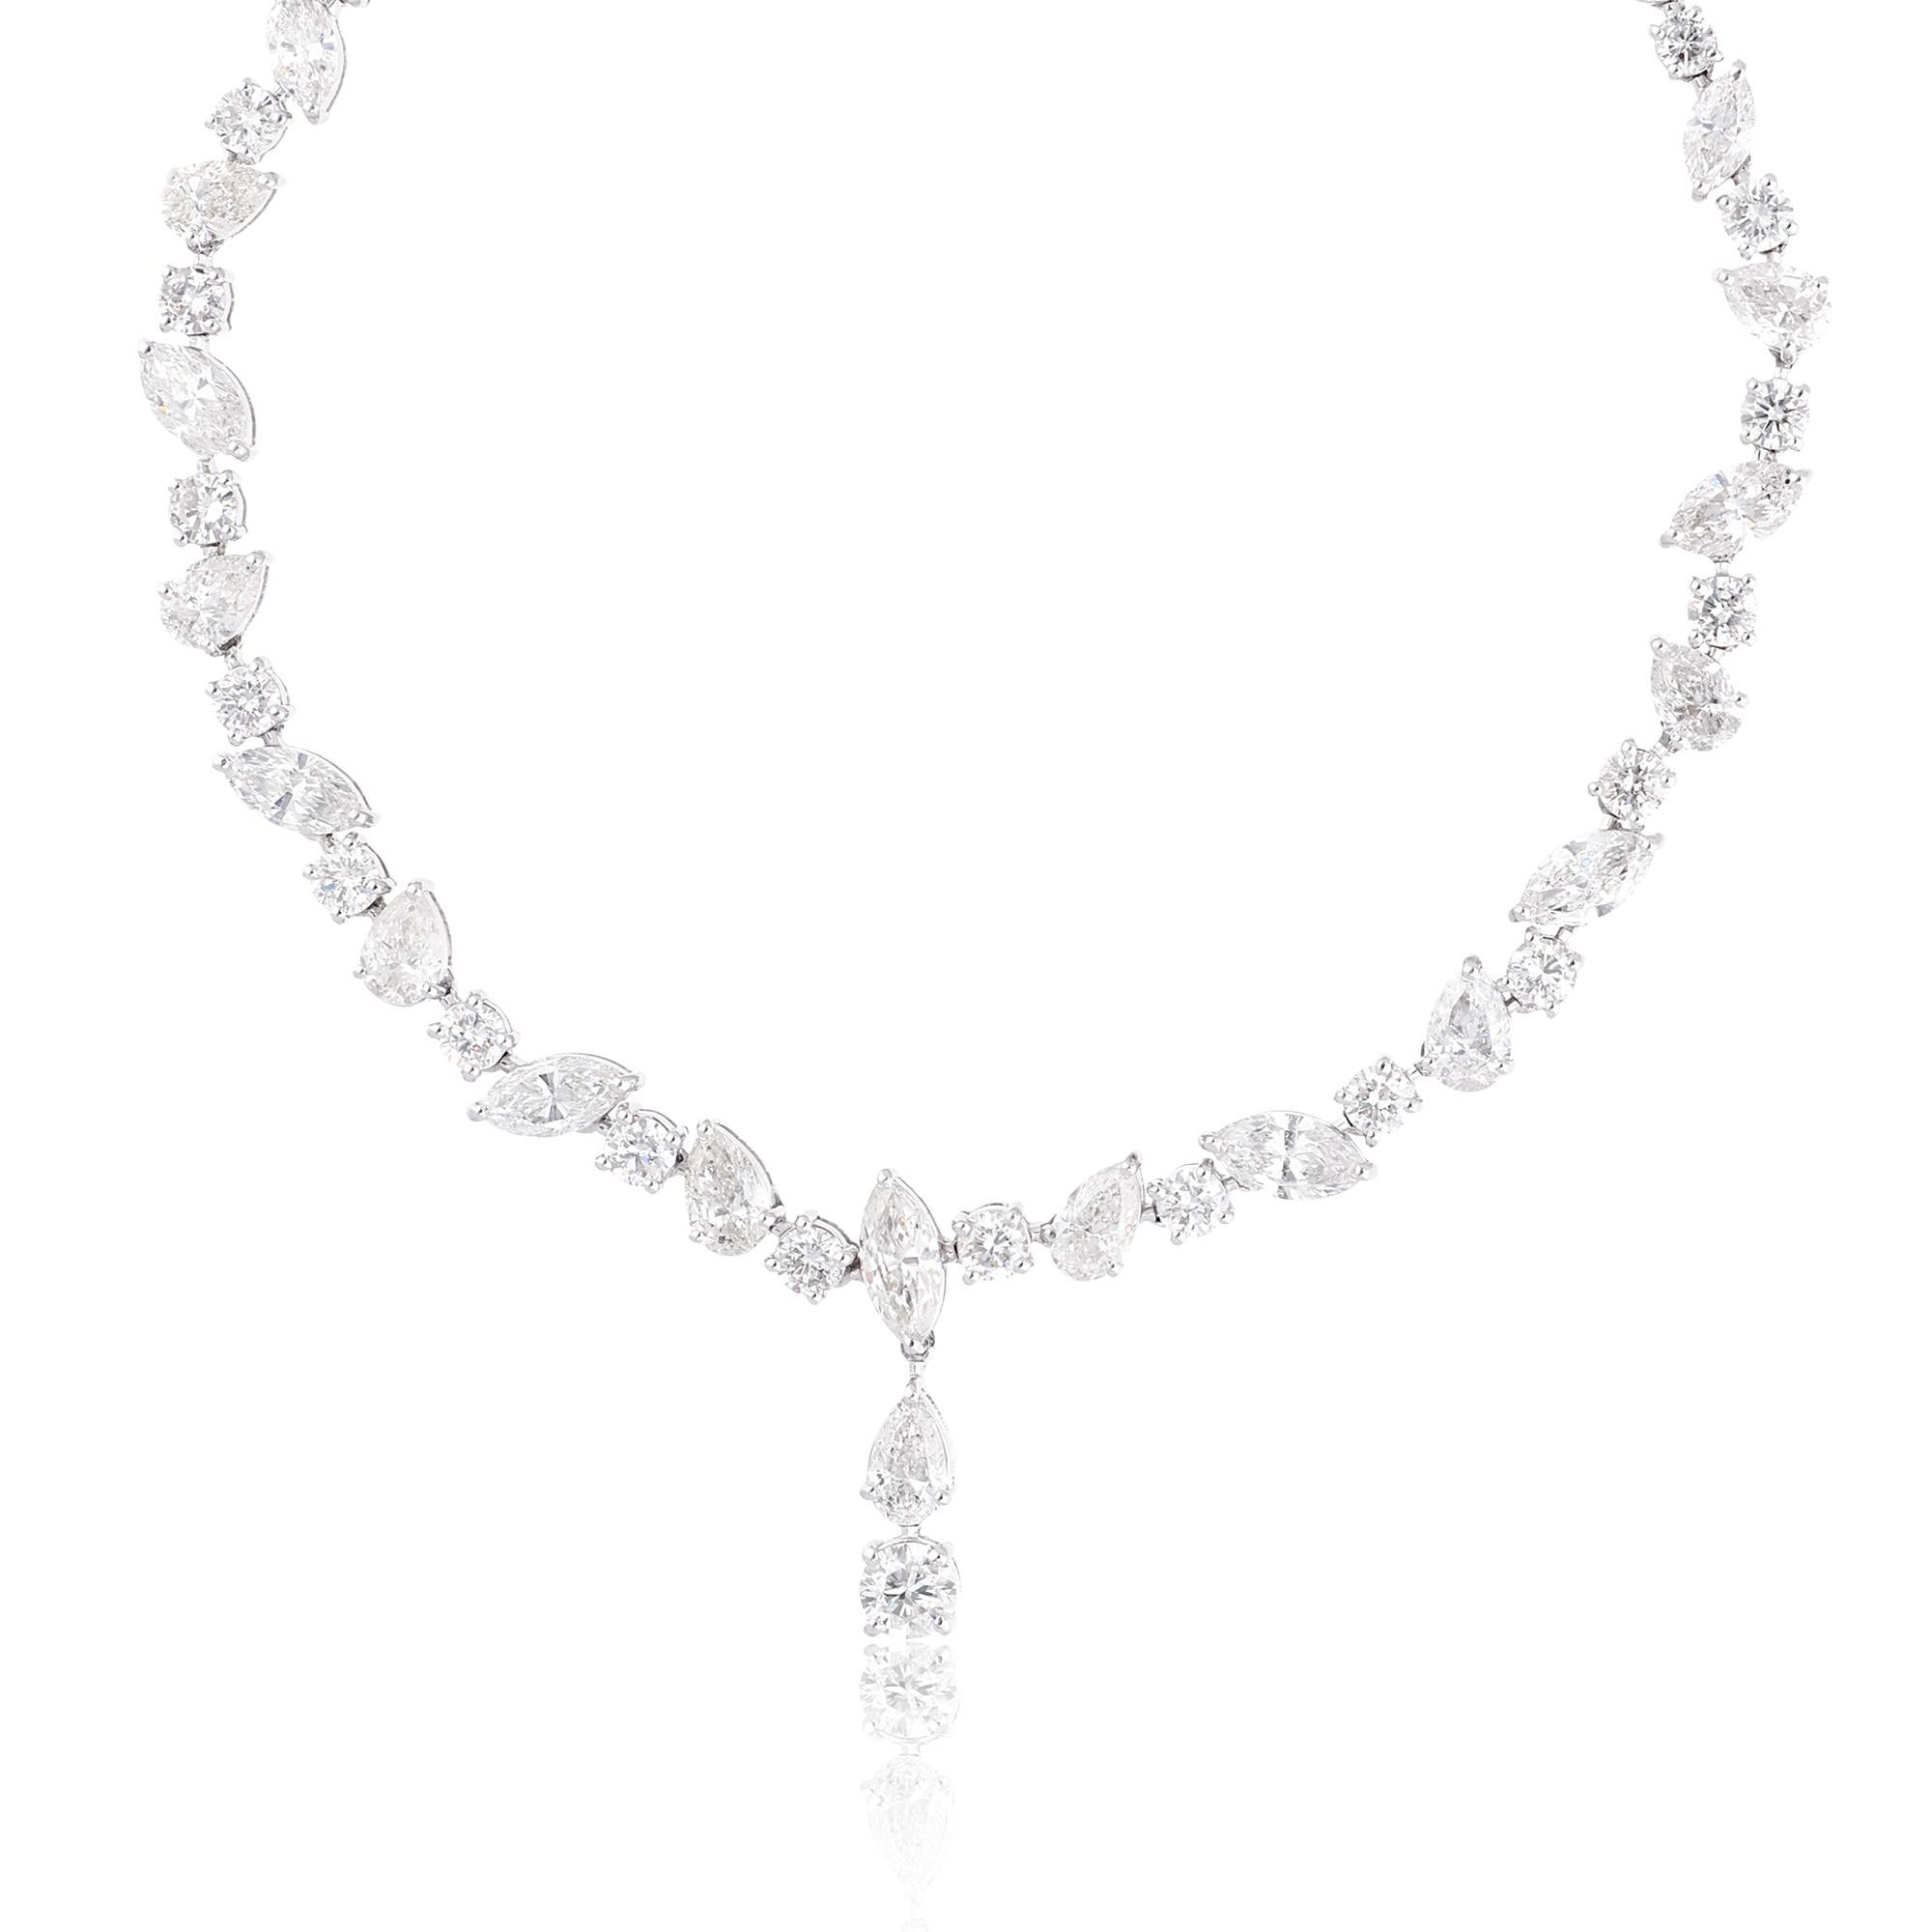 The focal point of this necklace is the dazzling array of diamonds. Each diamond is carefully selected for its exceptional quality, featuring SI clarity and HI color, ensuring a stunning display of brilliance and sparkle. The diamonds are expertly